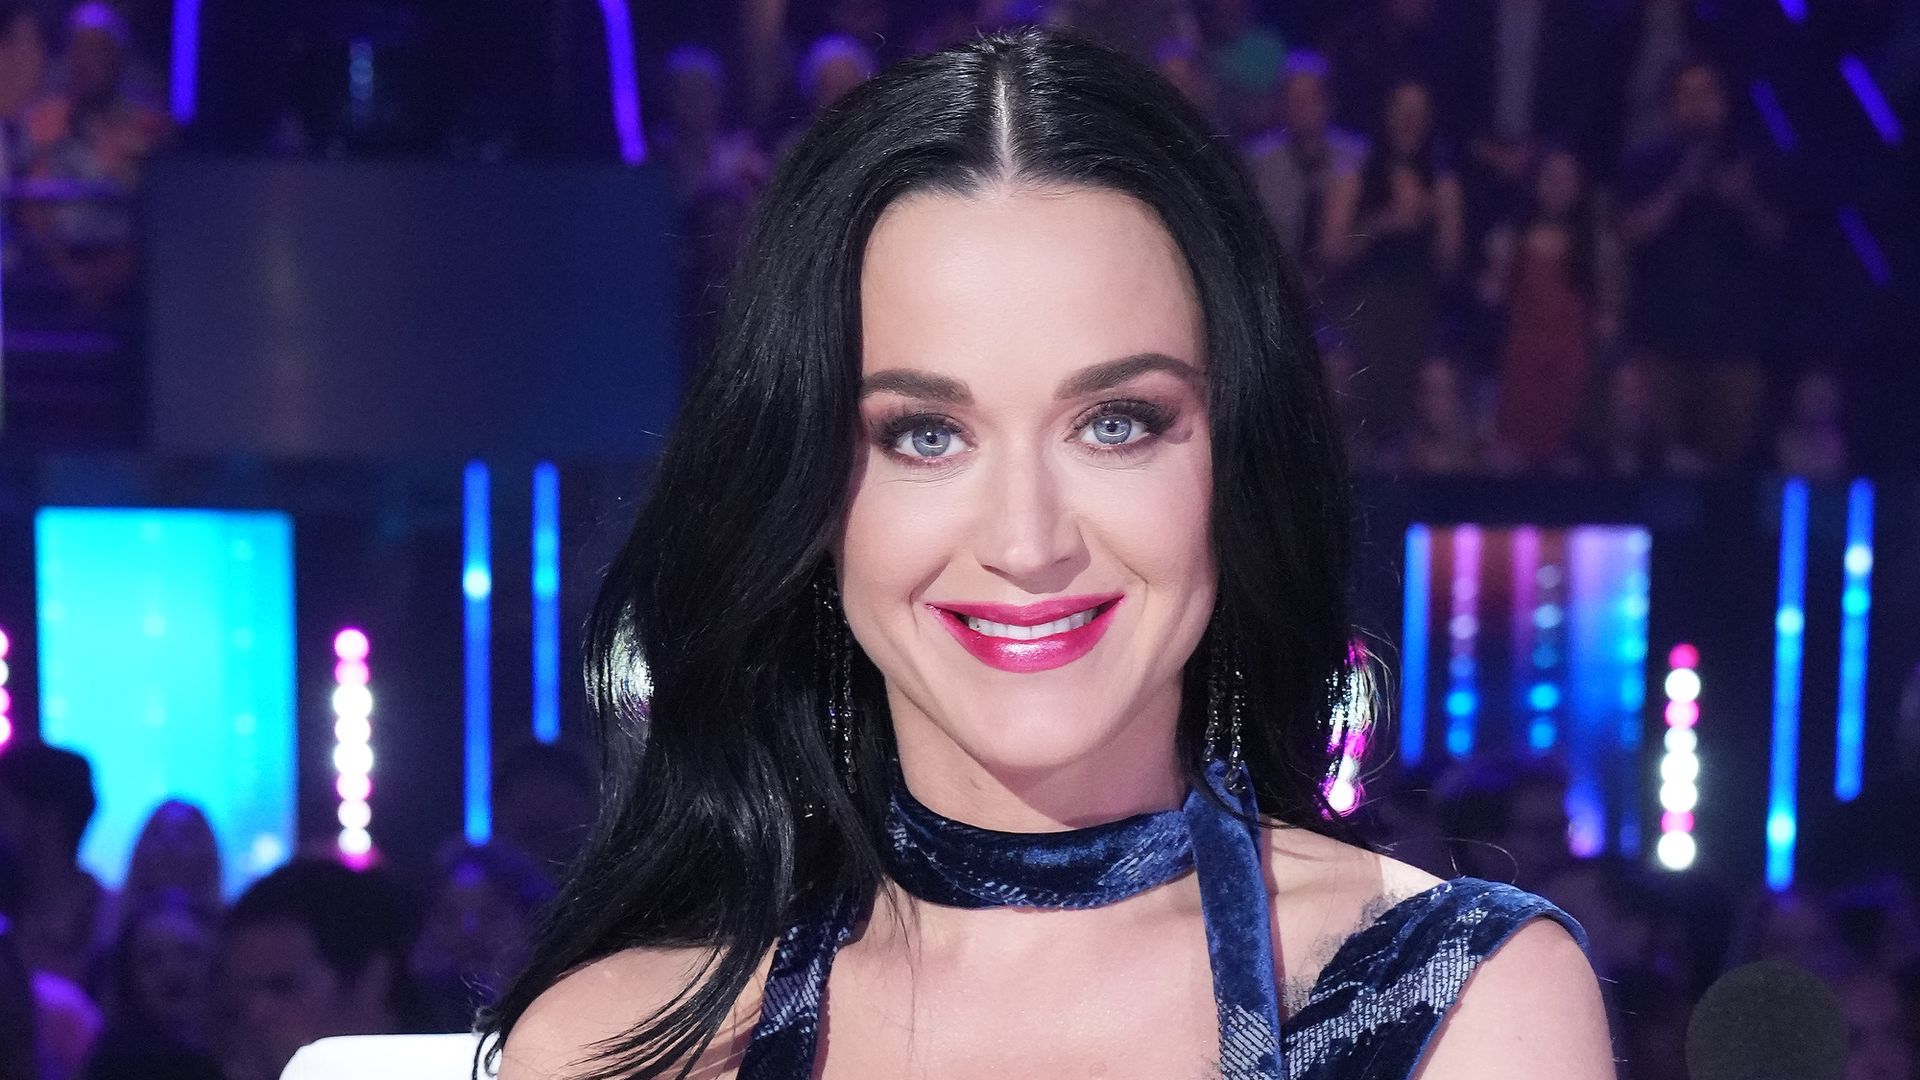 Katy Perry shares details about her luxury UK home ahead of King